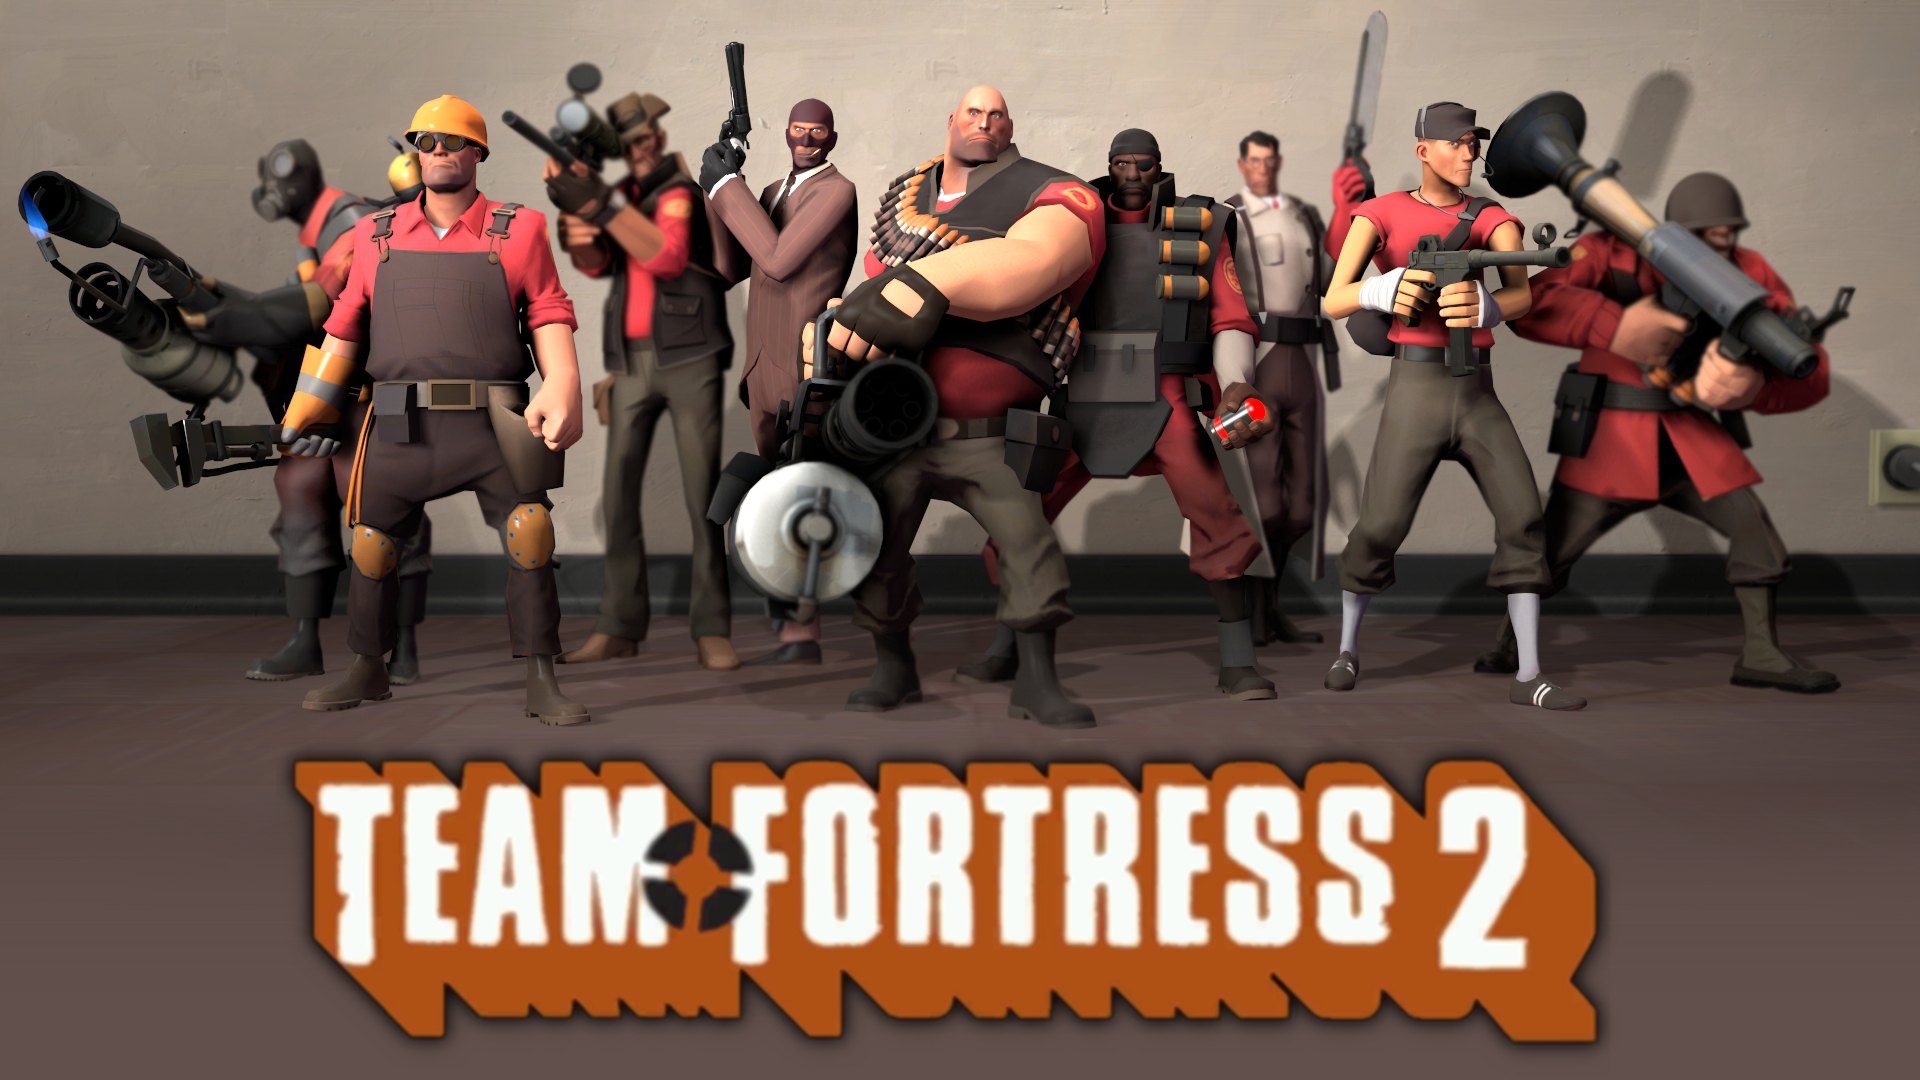 team fortress 2 logo text character